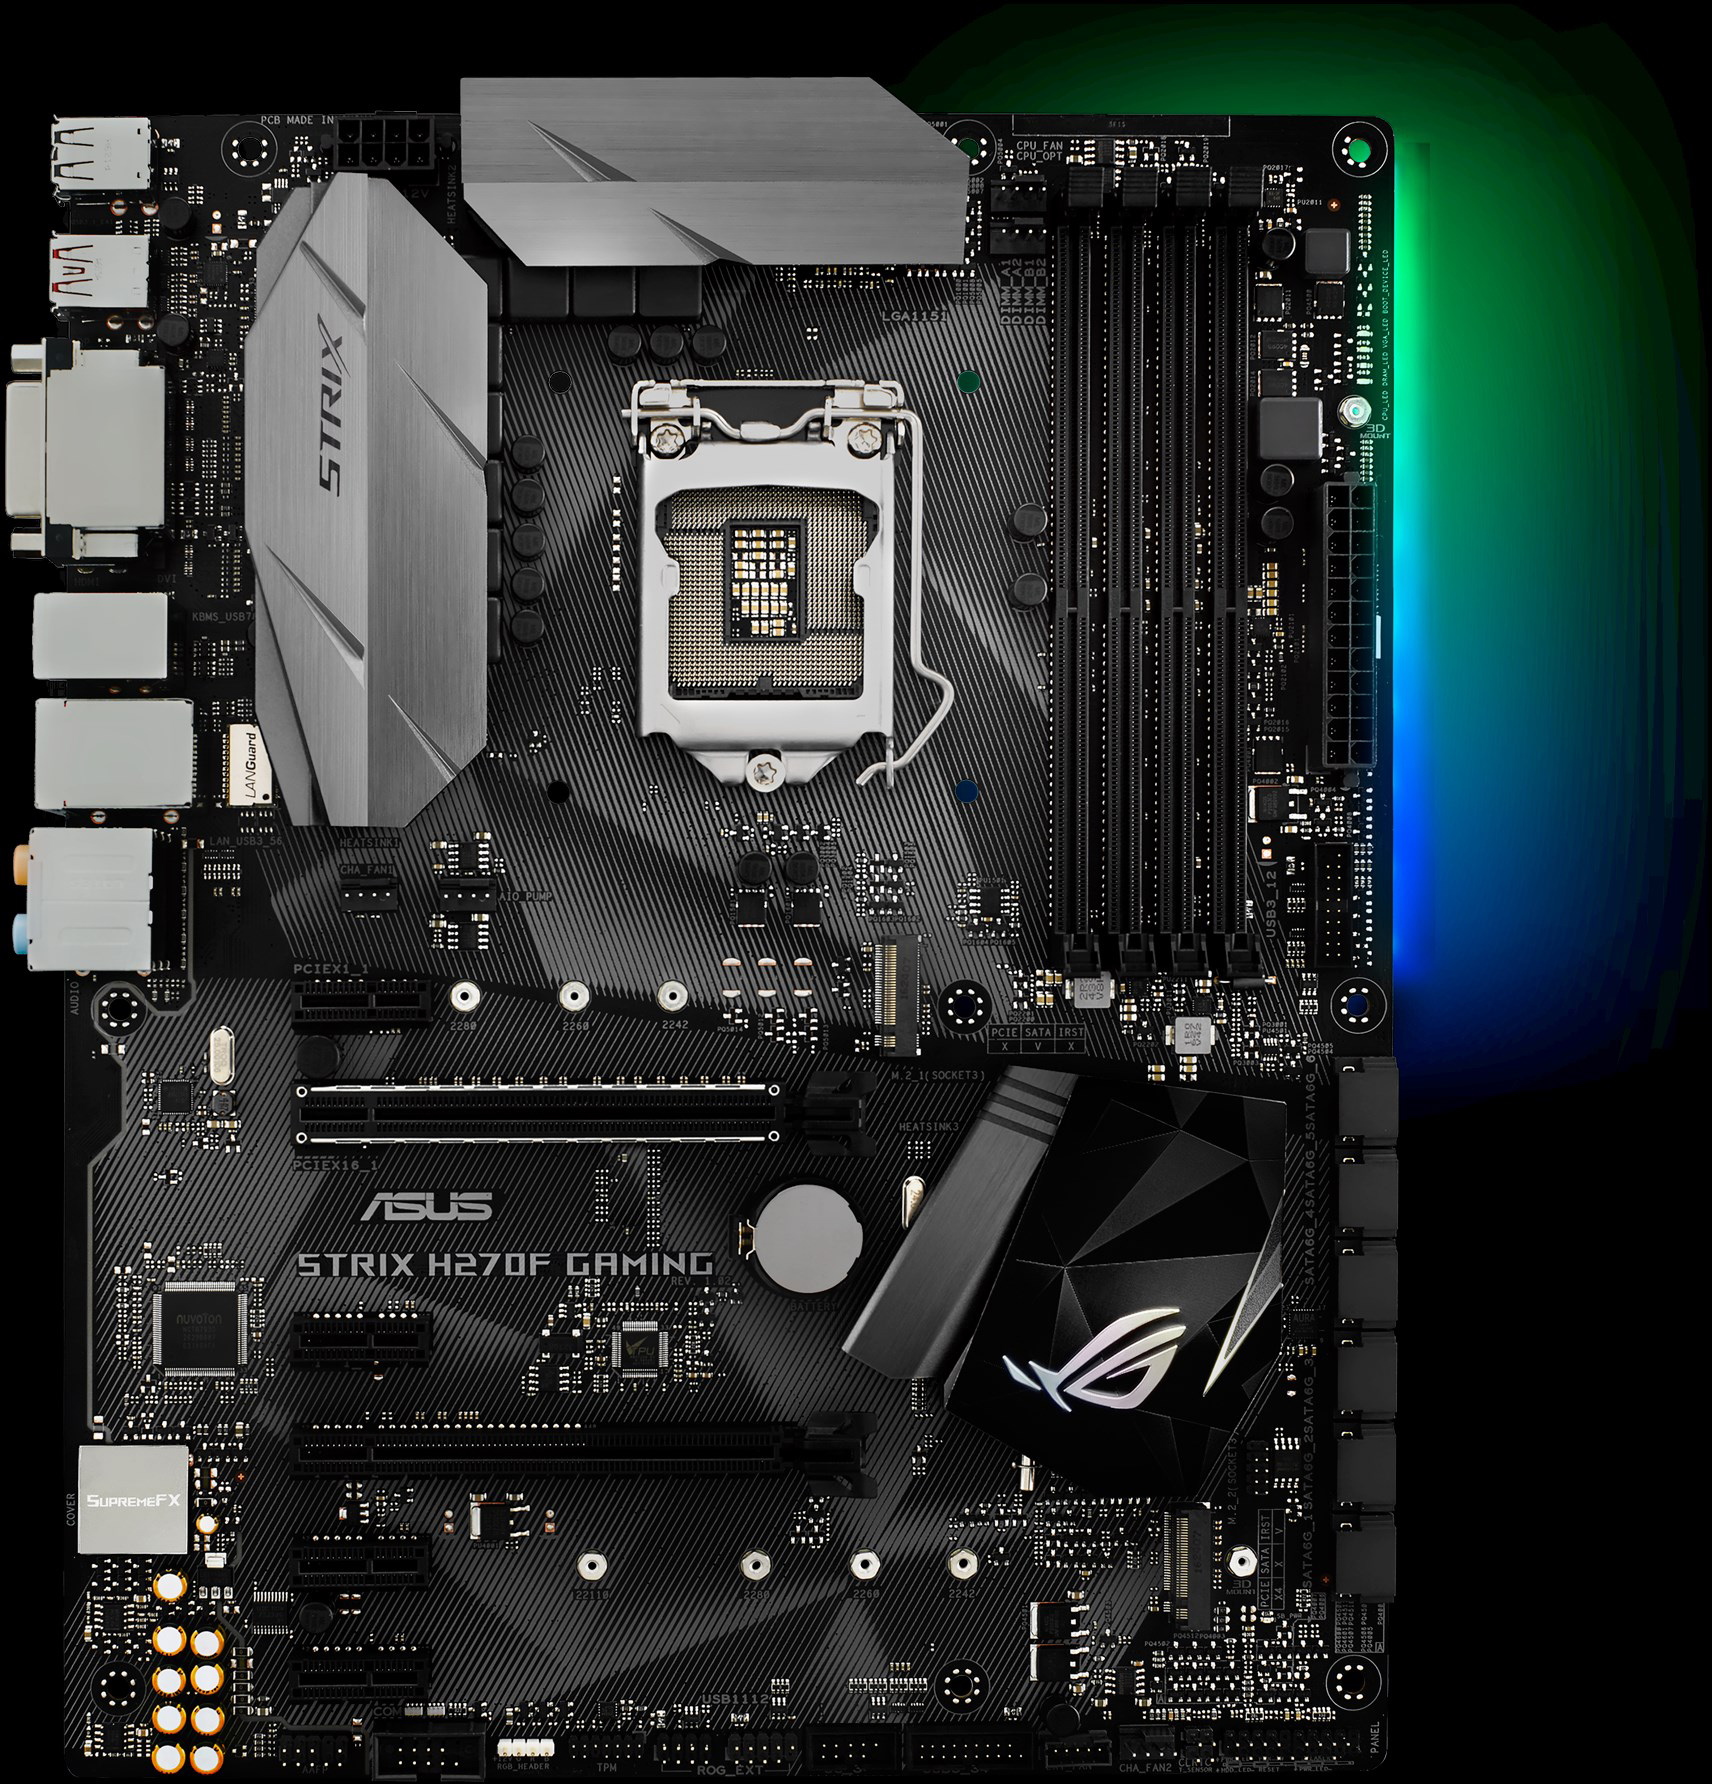 Asus ROG Strix H270F Gaming - Motherboard Specifications On